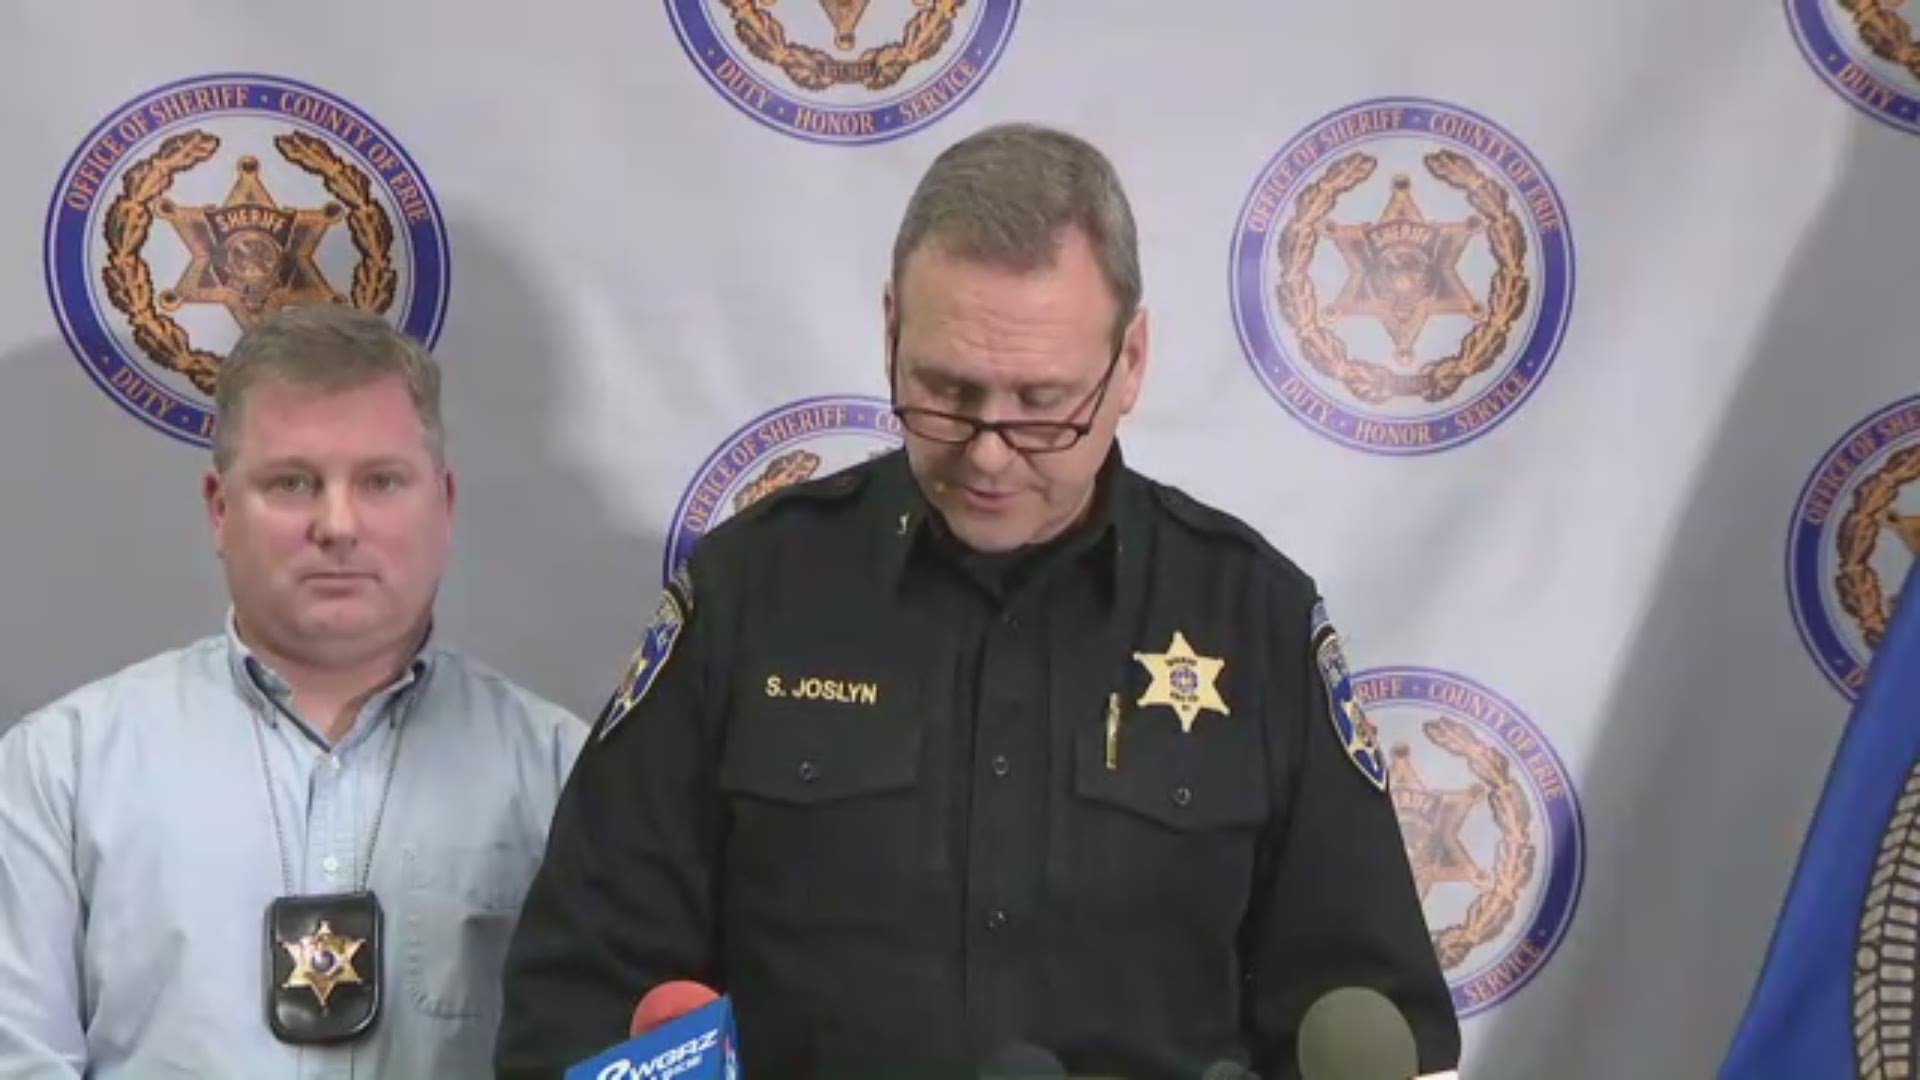 Erie County Sheriff's Office updates investigation into child shot in Collins. A 7-year-old boy is in stable condition at Children's Hospital.